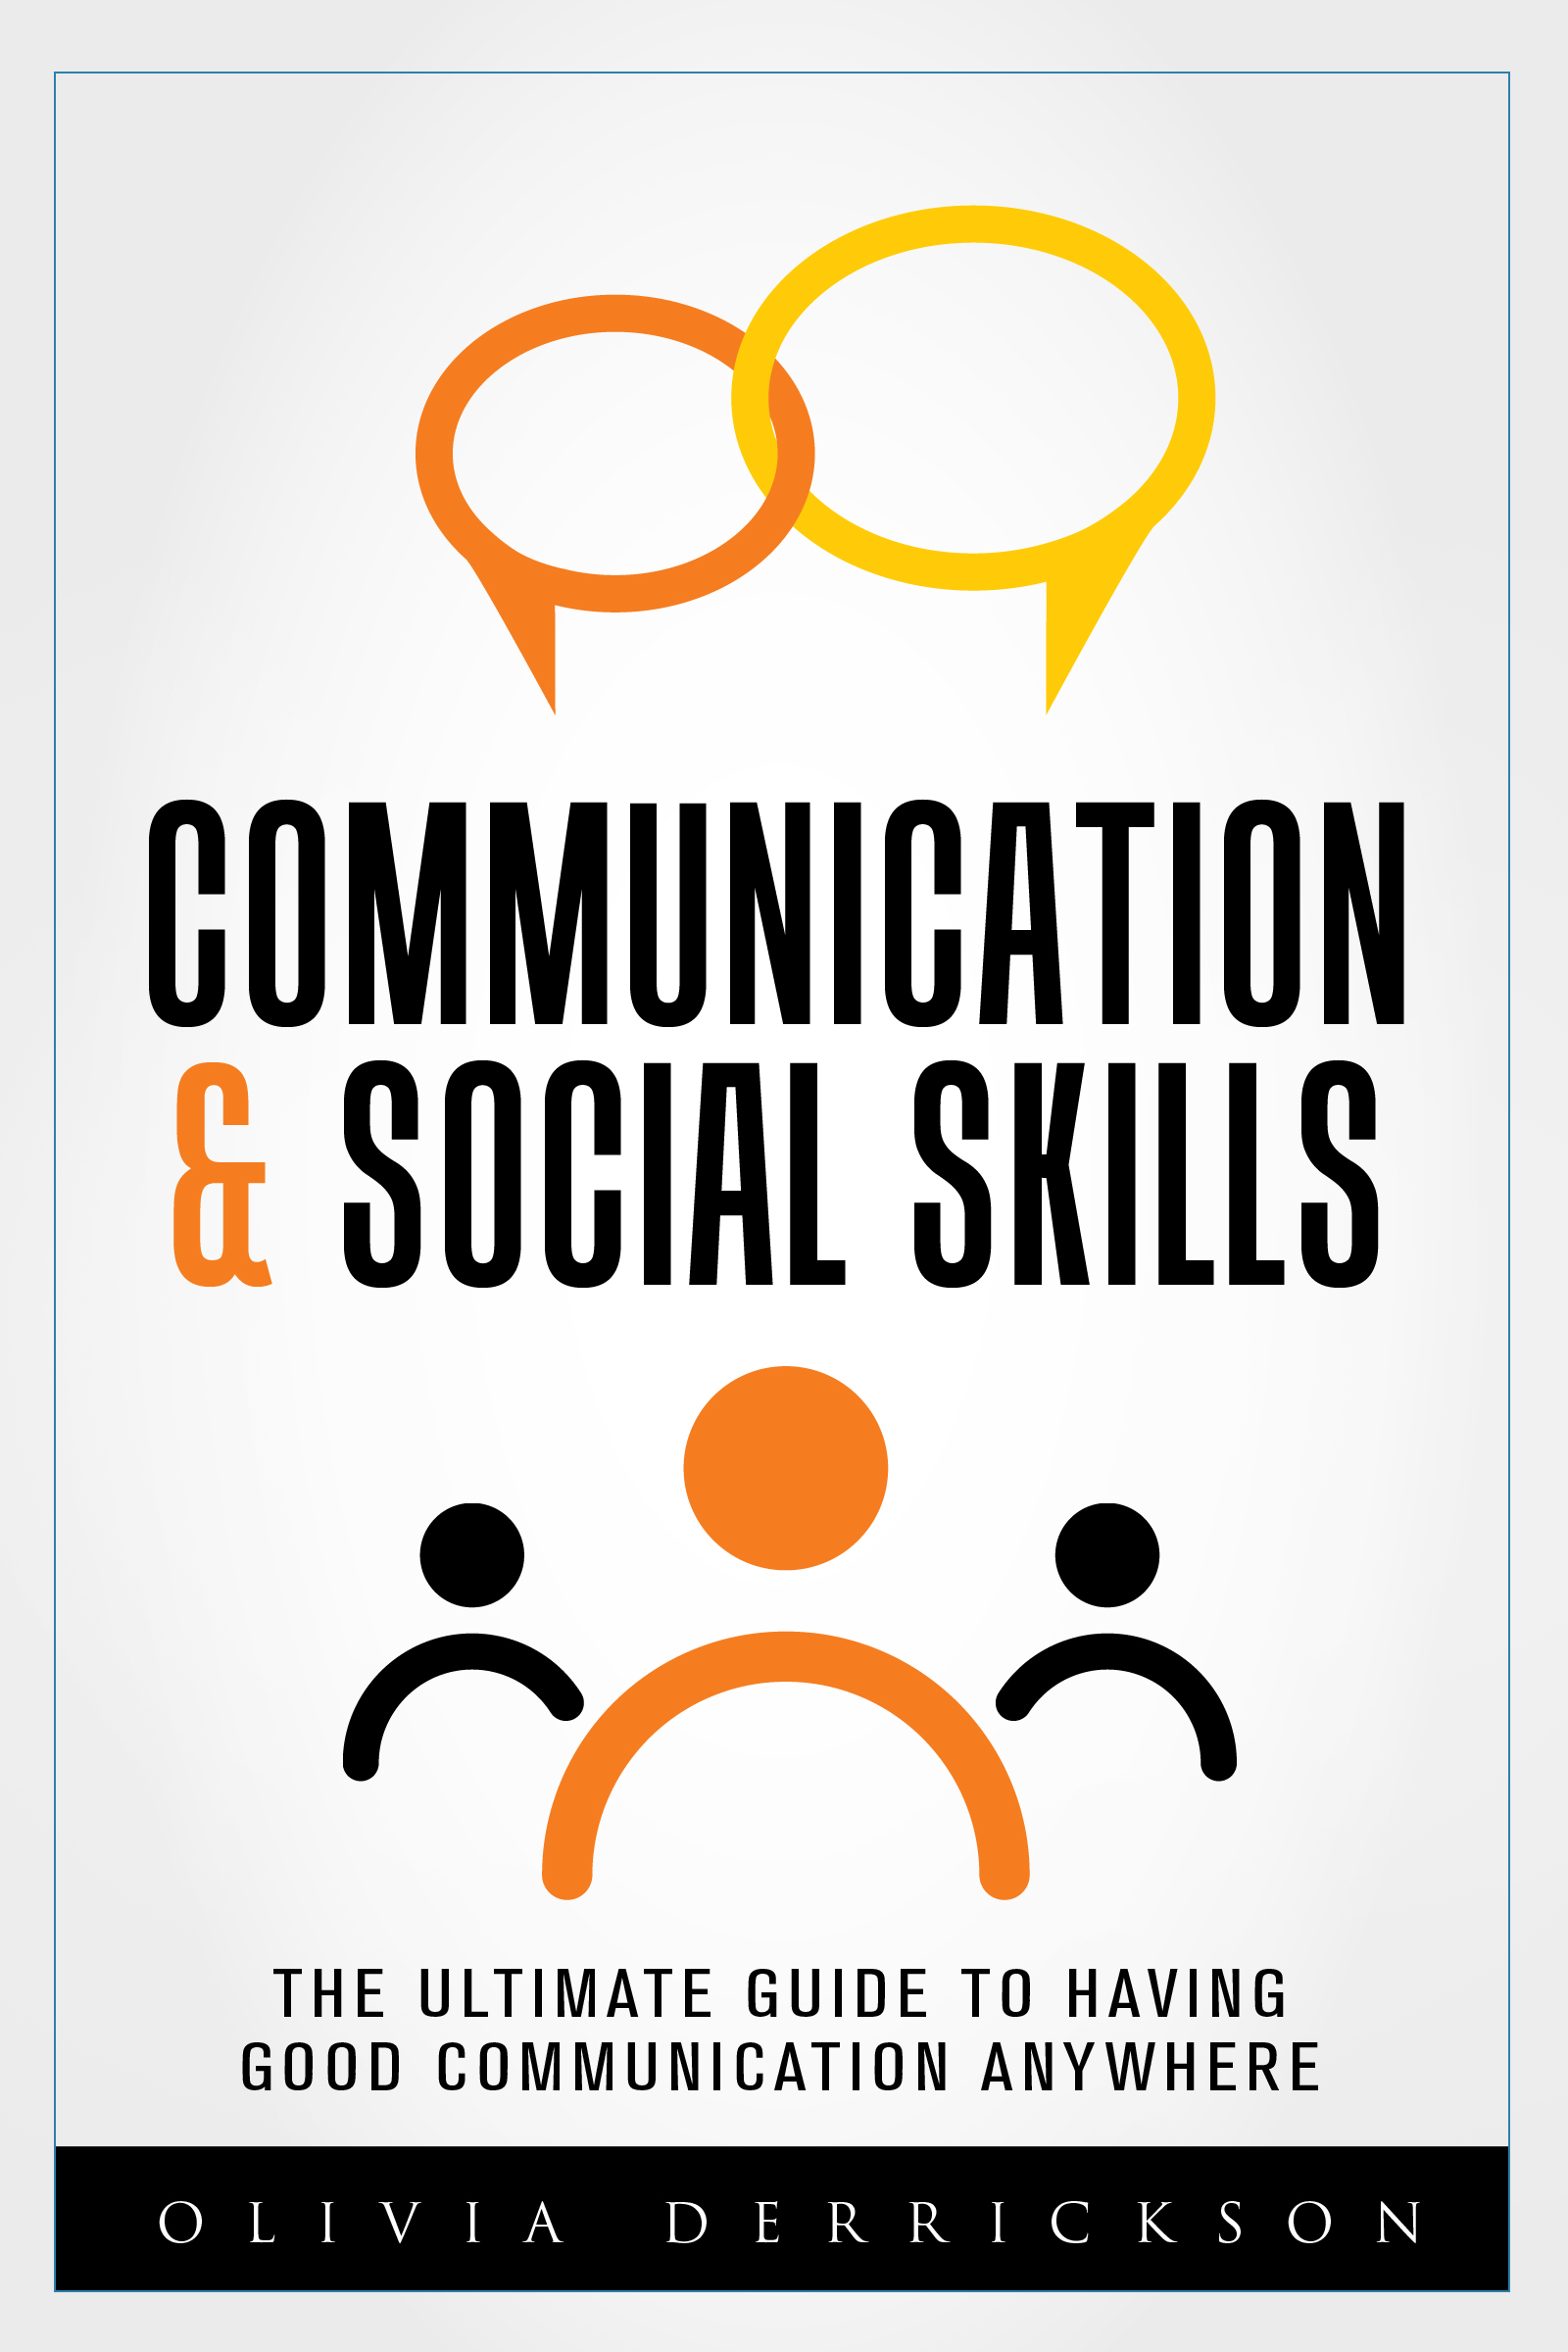 FREE: The ultimate Guide to having Good Communication Anywhere: All Must Have Communication & Social Skills by Olivia Derrickson